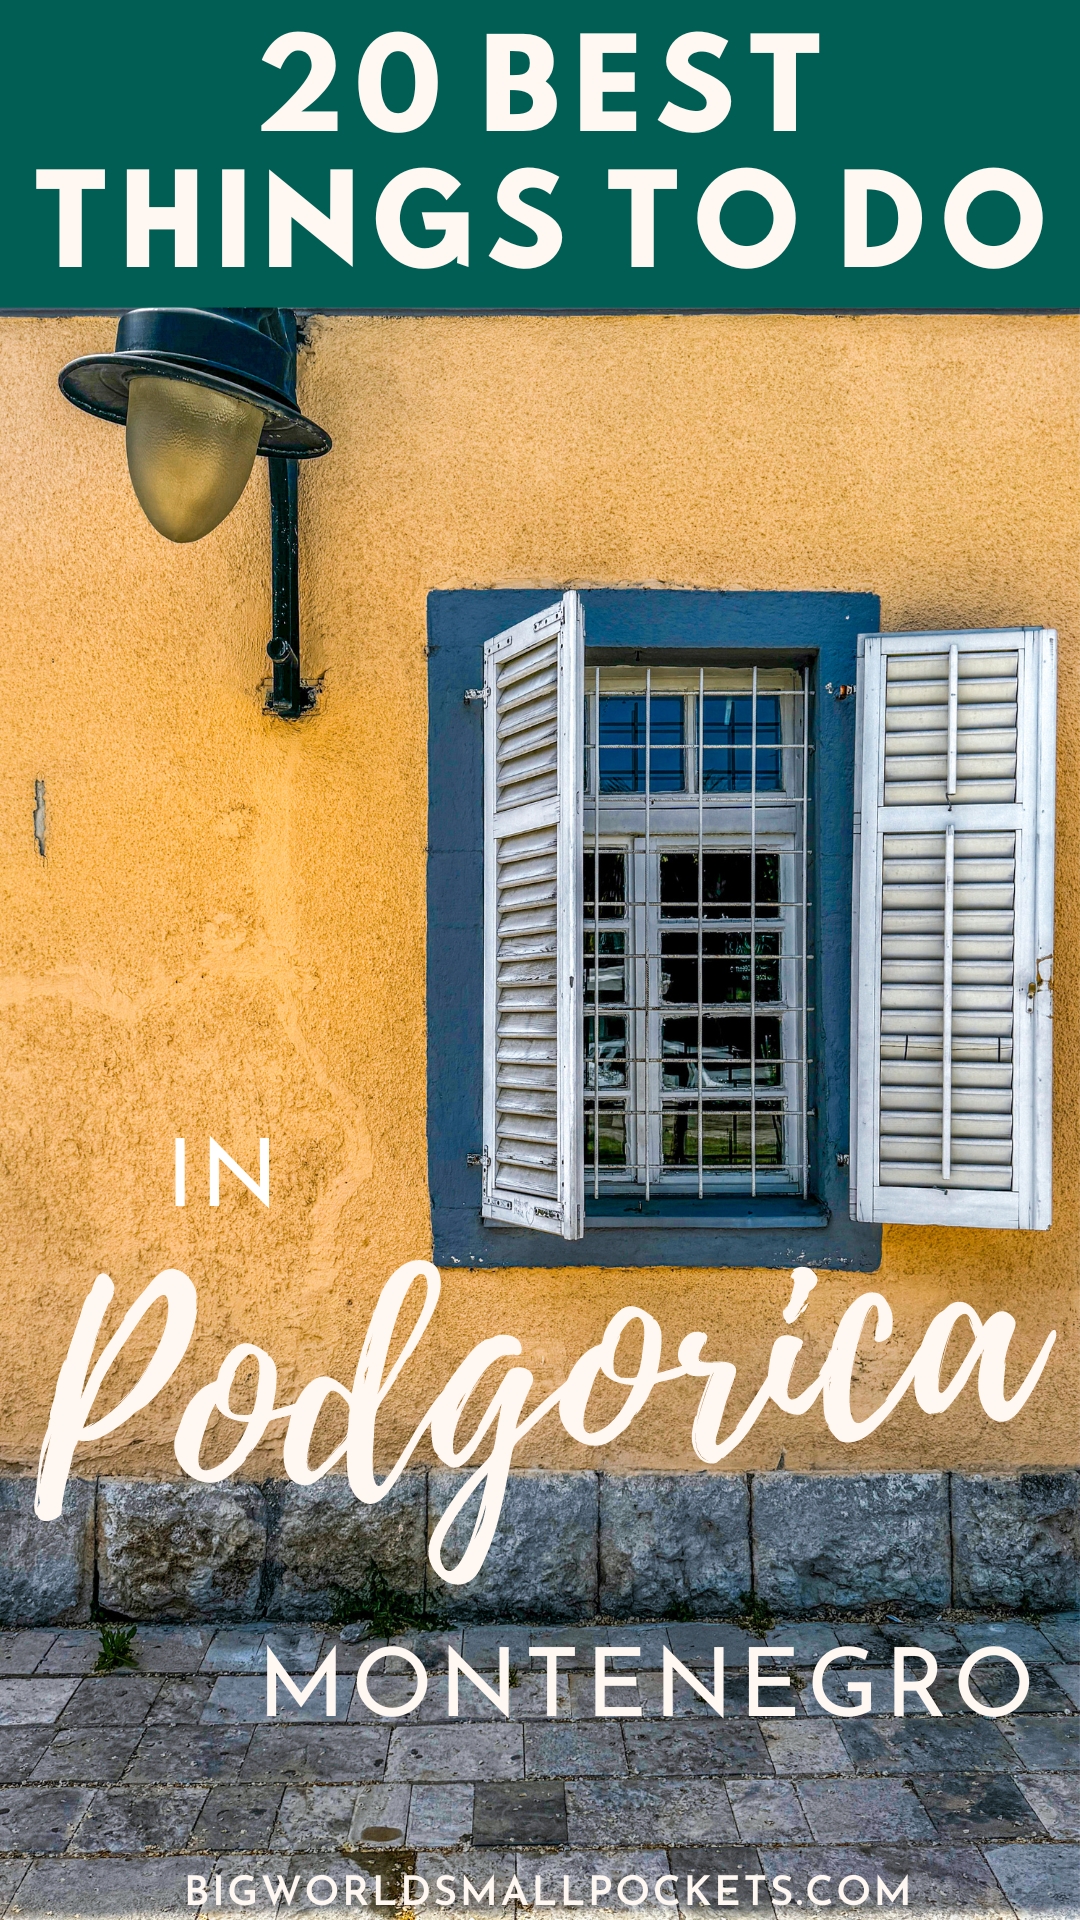 20+ Things to Do in Podgorica, Montenegro + Travel Guide